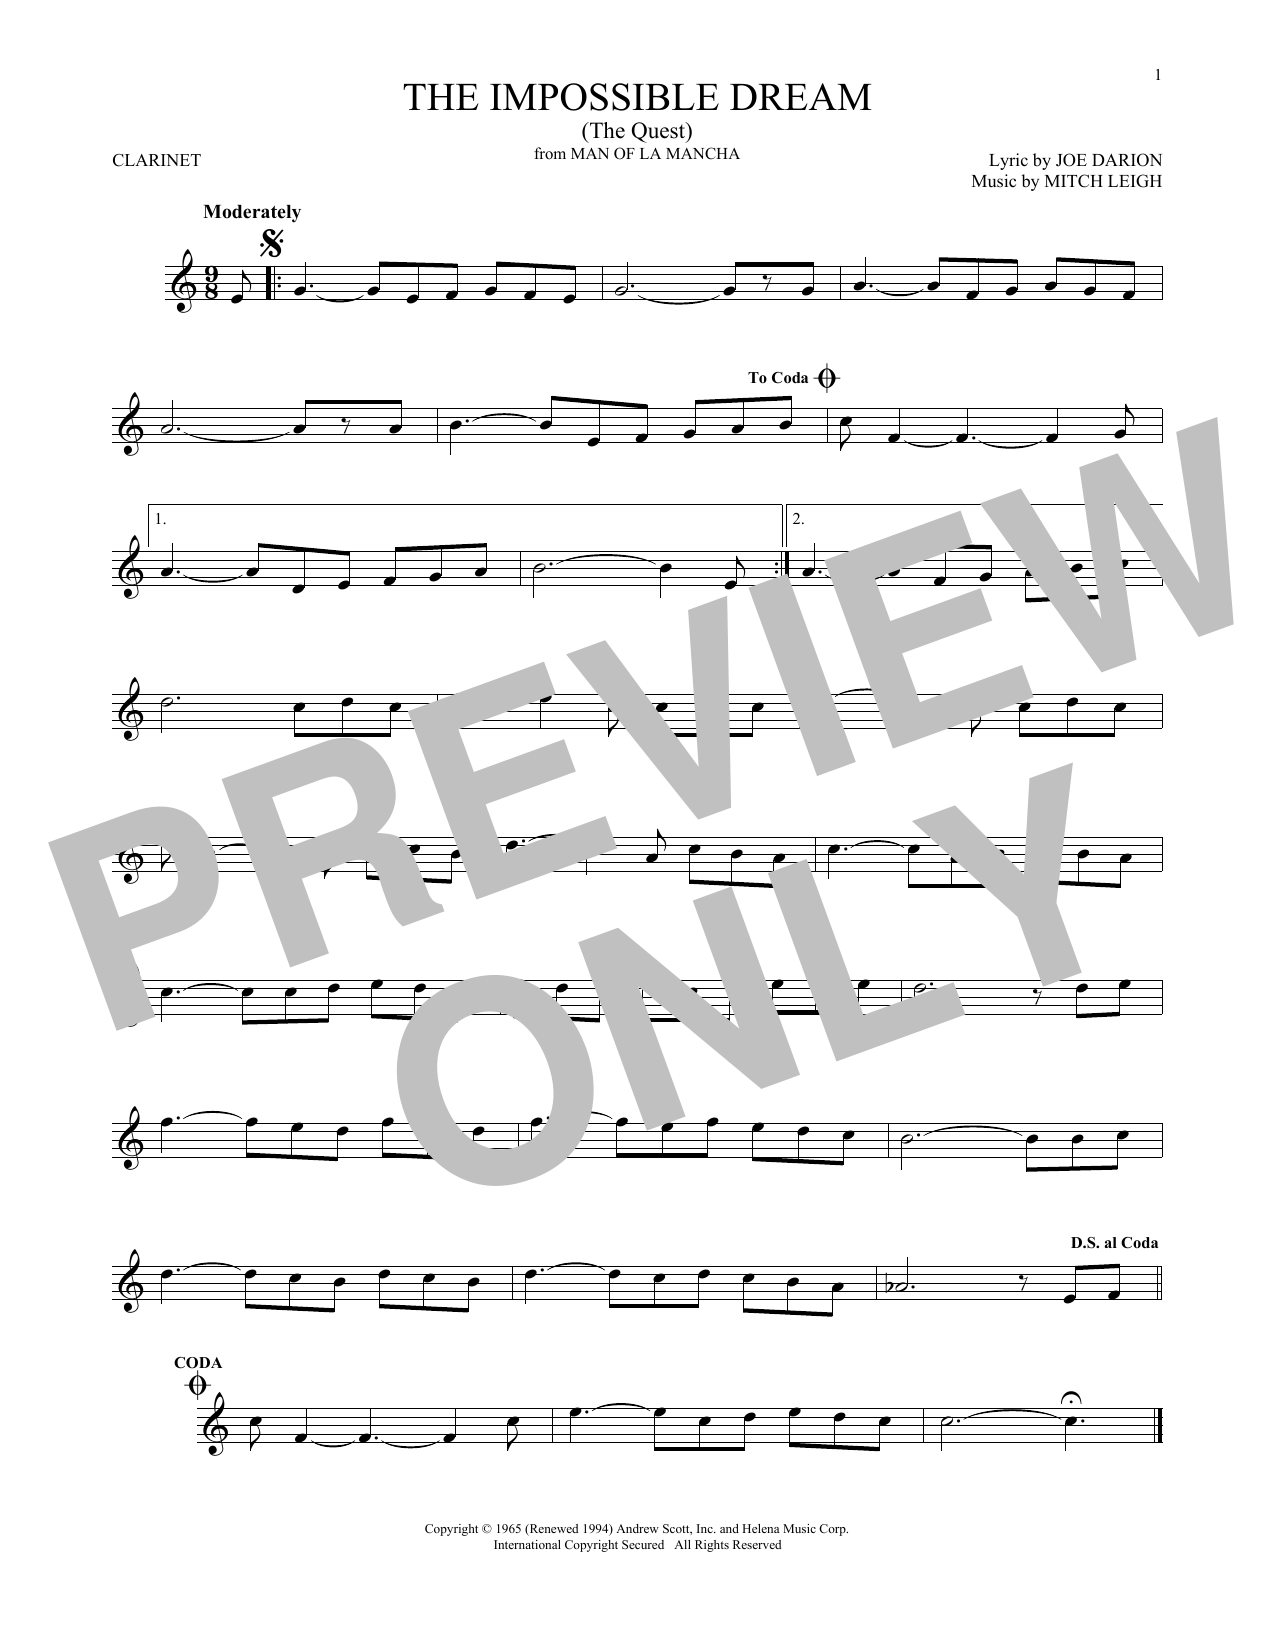 Download Mitch Leigh The Impossible Dream (The Quest) Sheet Music